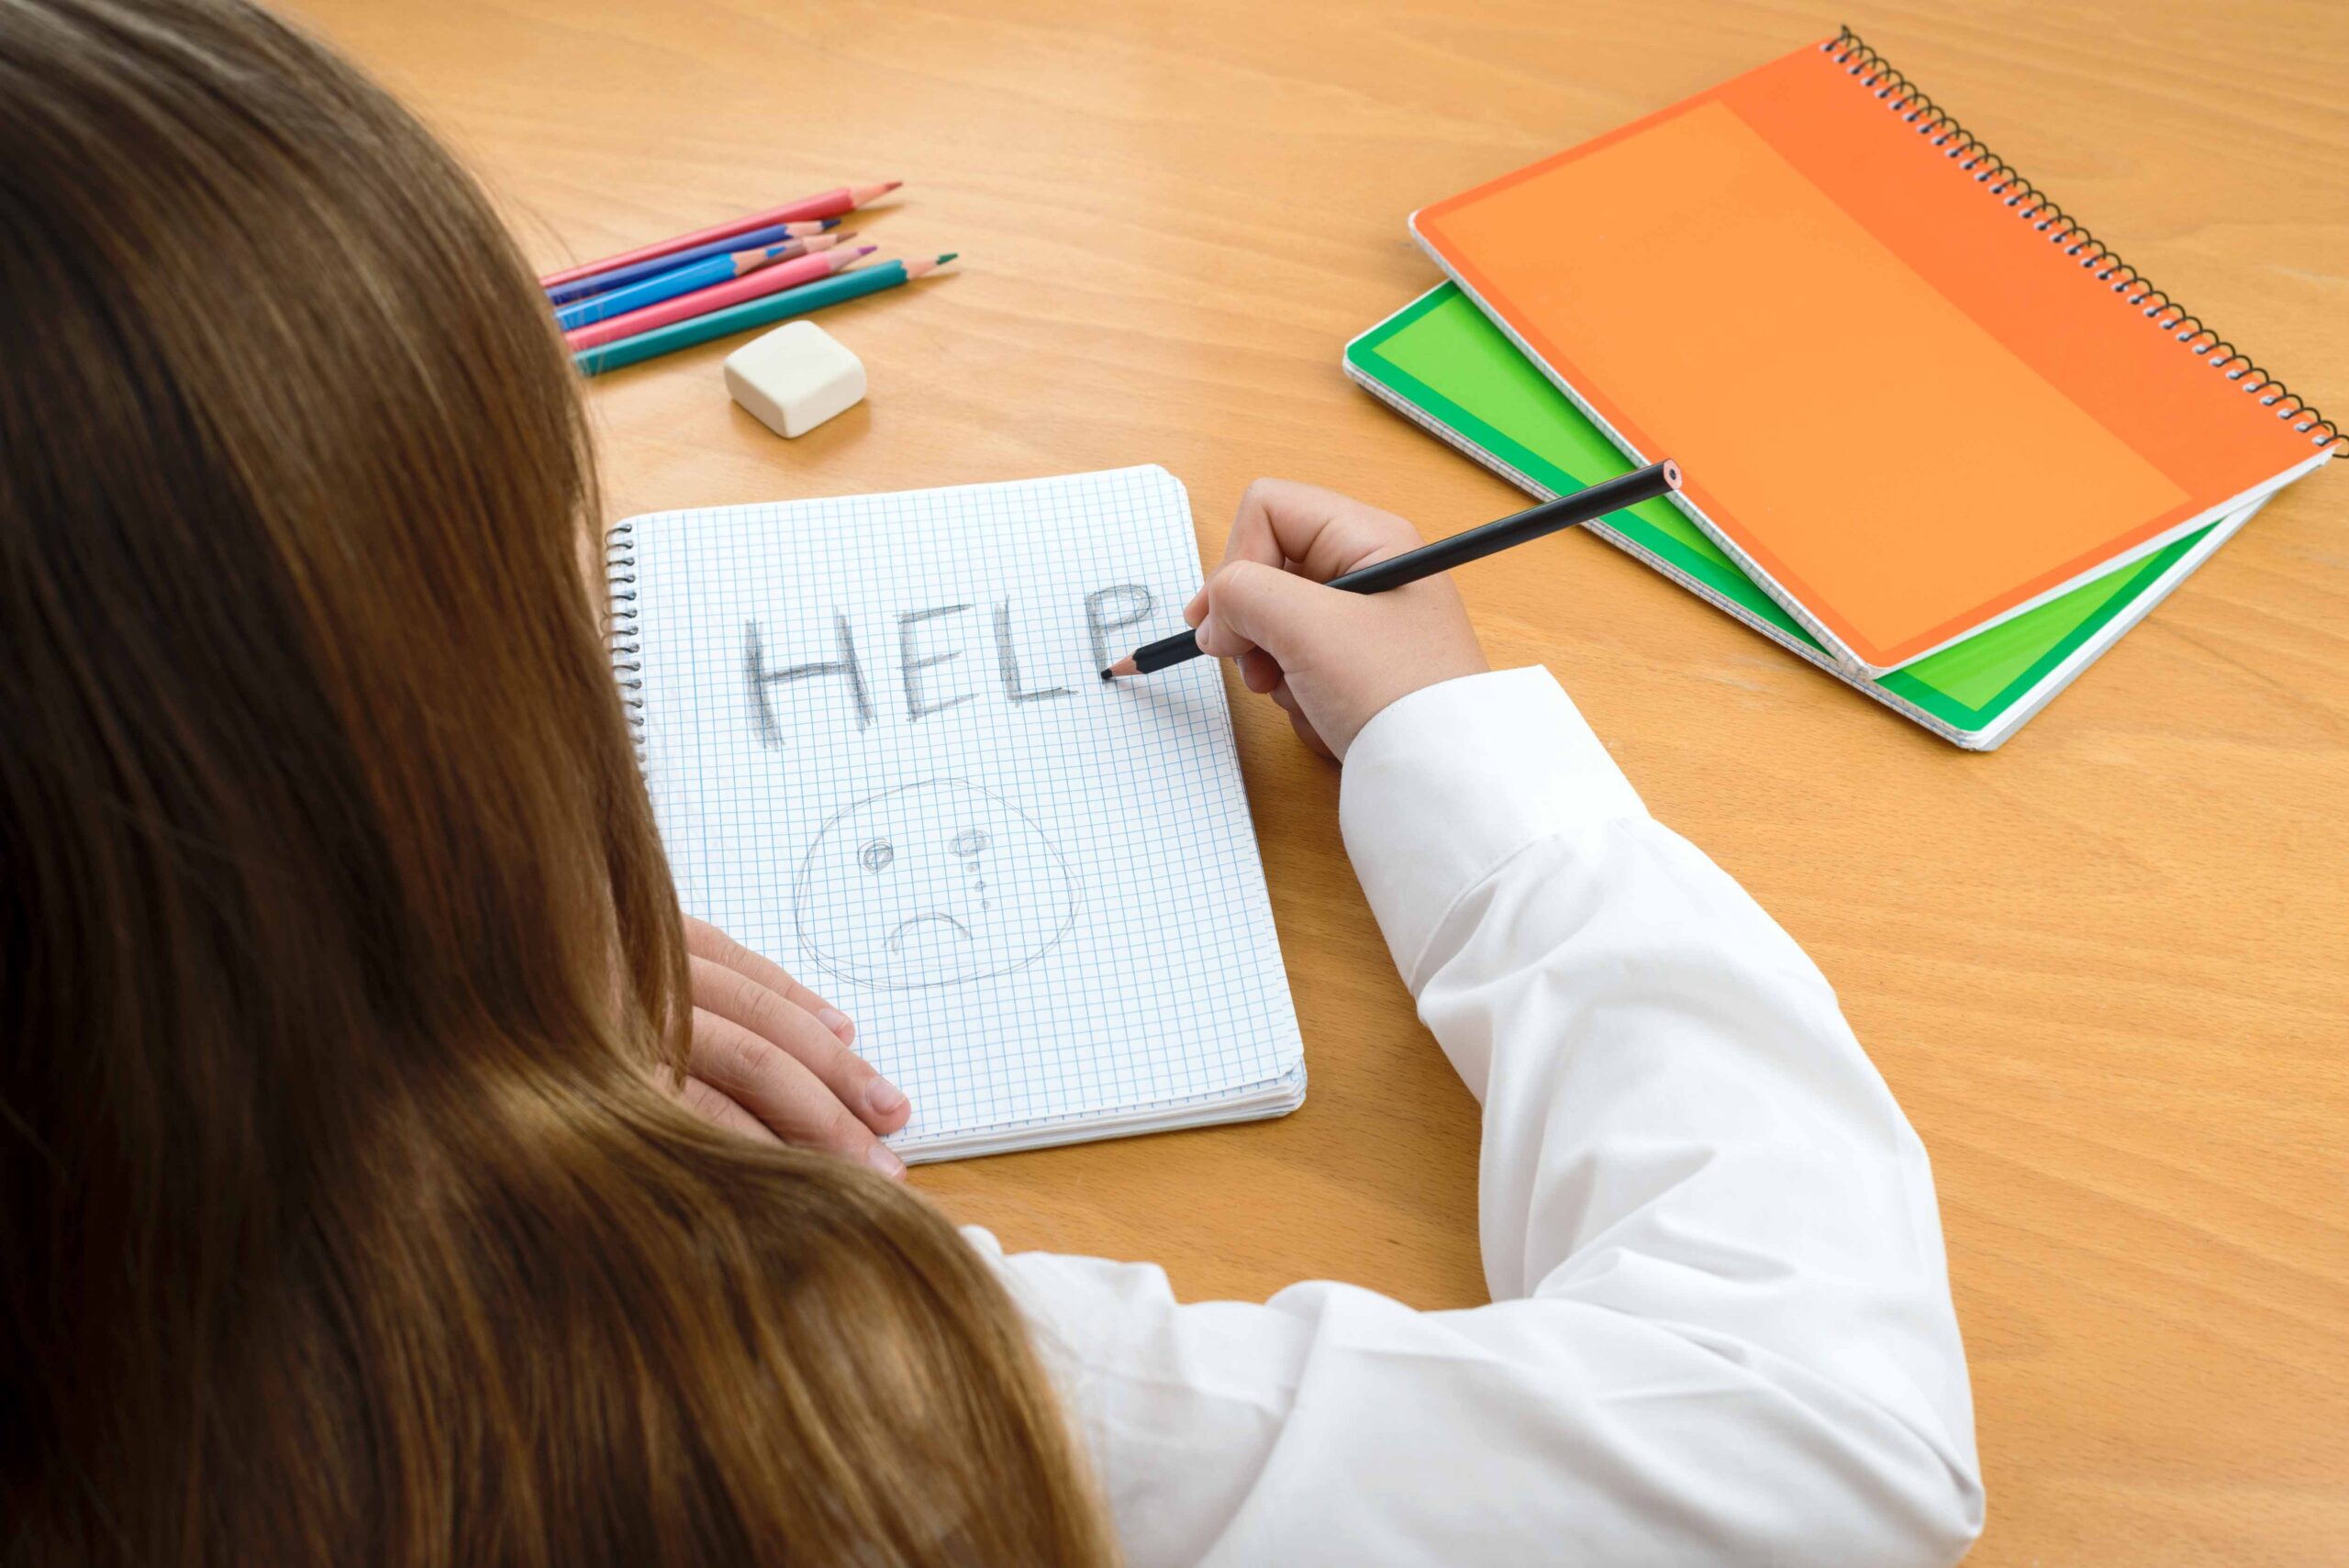 Young girl writing a message asking for help